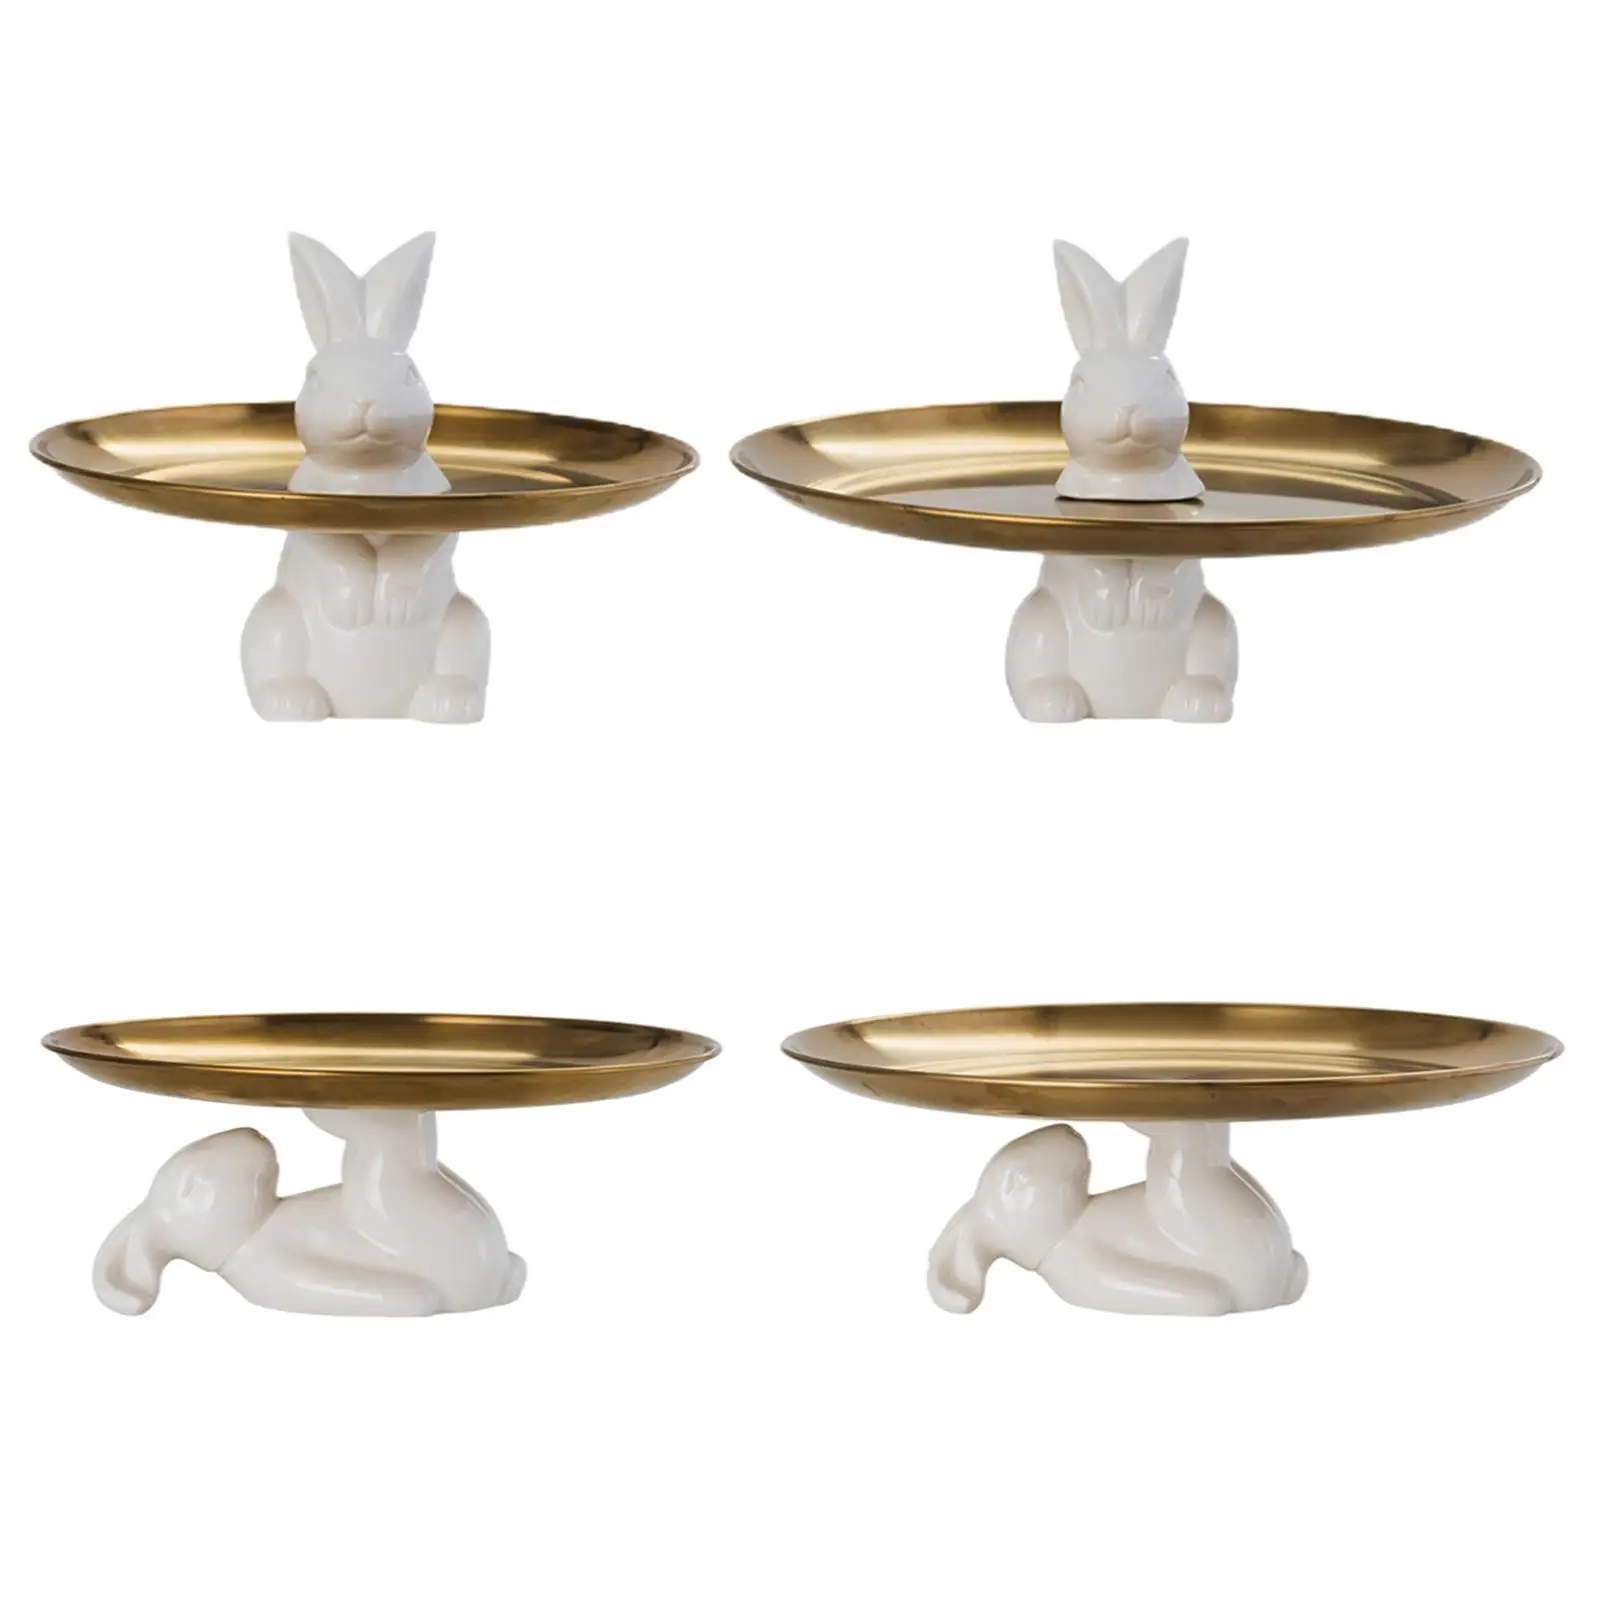 Rabbit Tray Metal Round Golden Modern Decorative Bunny Animal Holder Stand Plate for Food Server Cupcake Jewelry Cookies Home